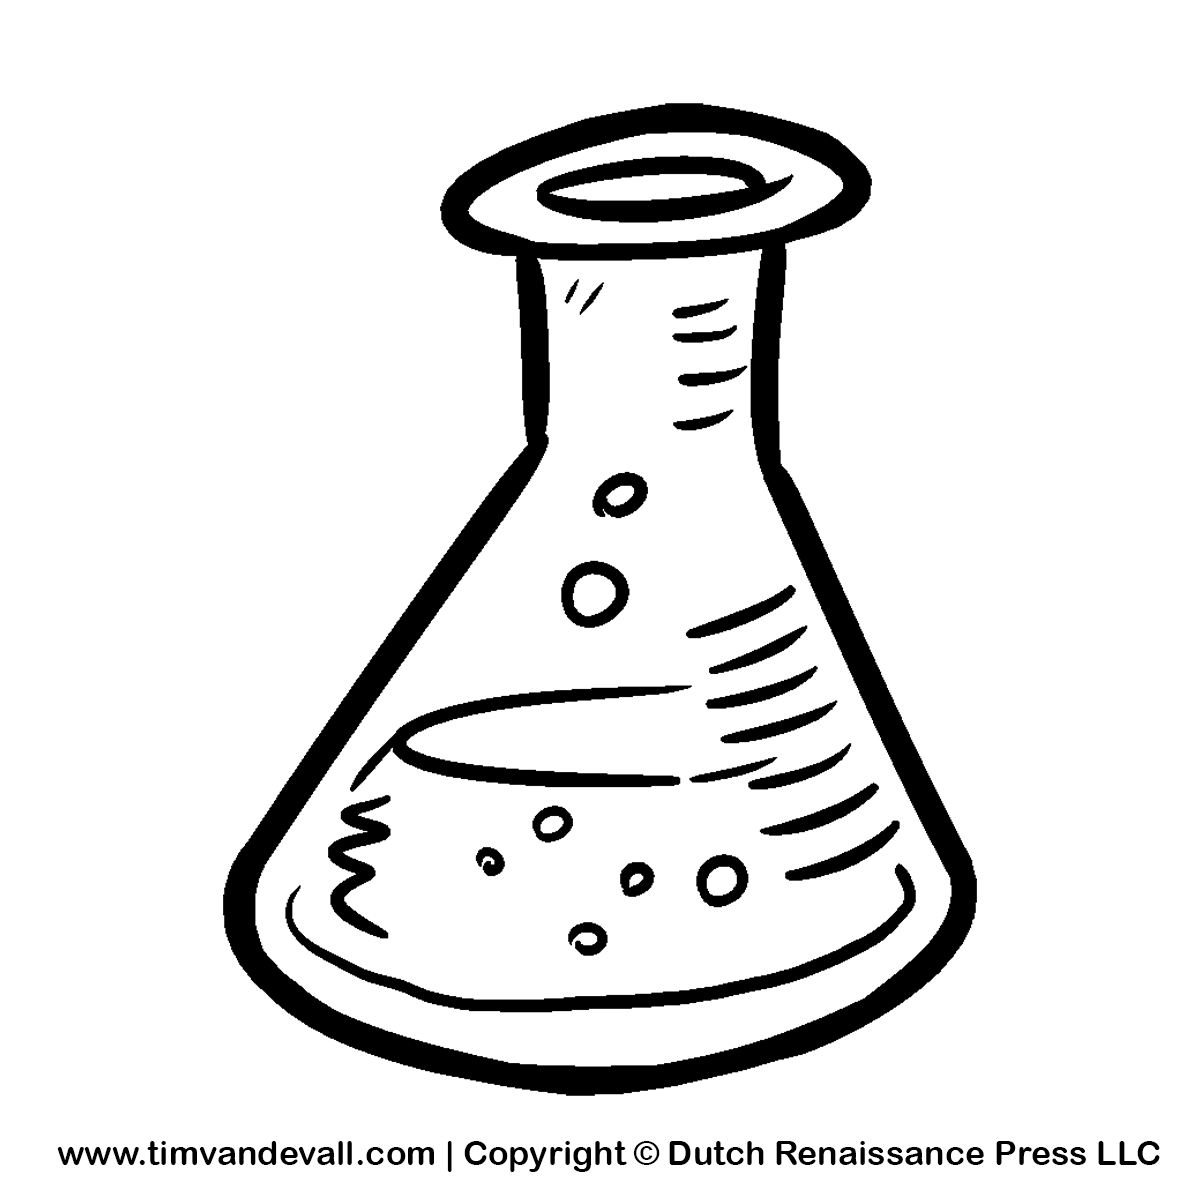 Science drawing at paintingvalley. Beaker clipart sketch